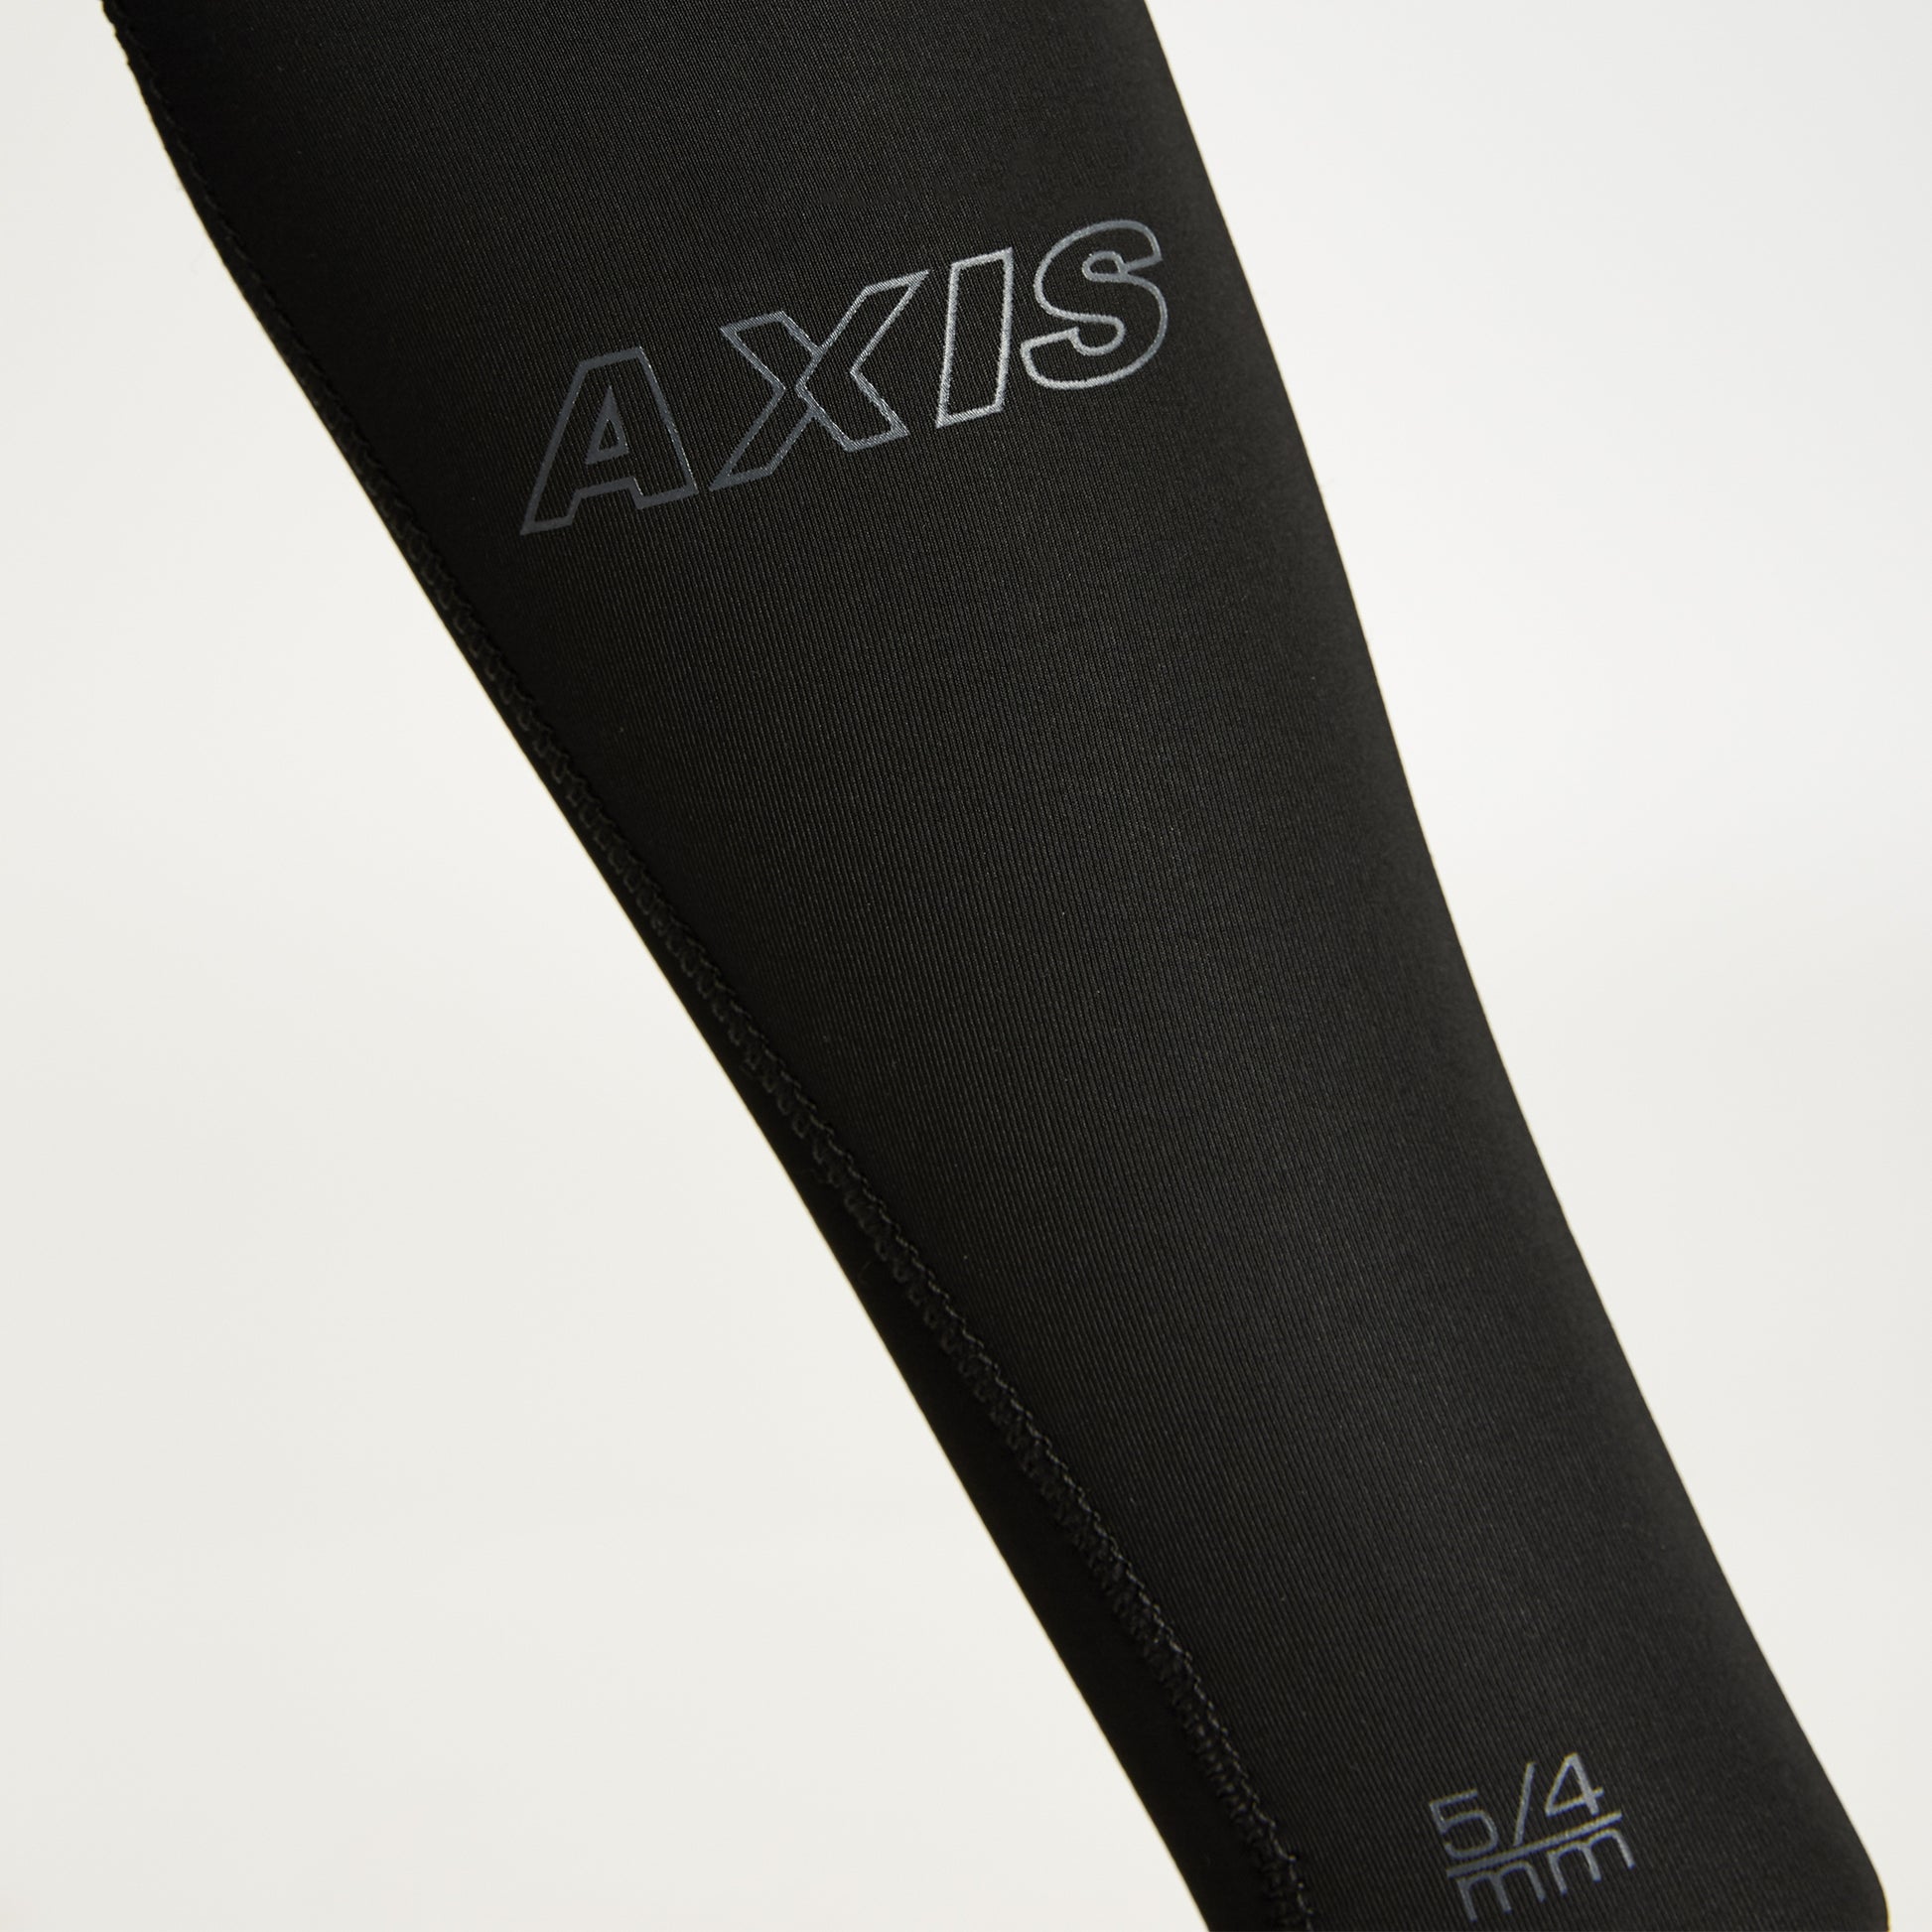 Women's Axis Hooded 5/4mm Full Wetsuit